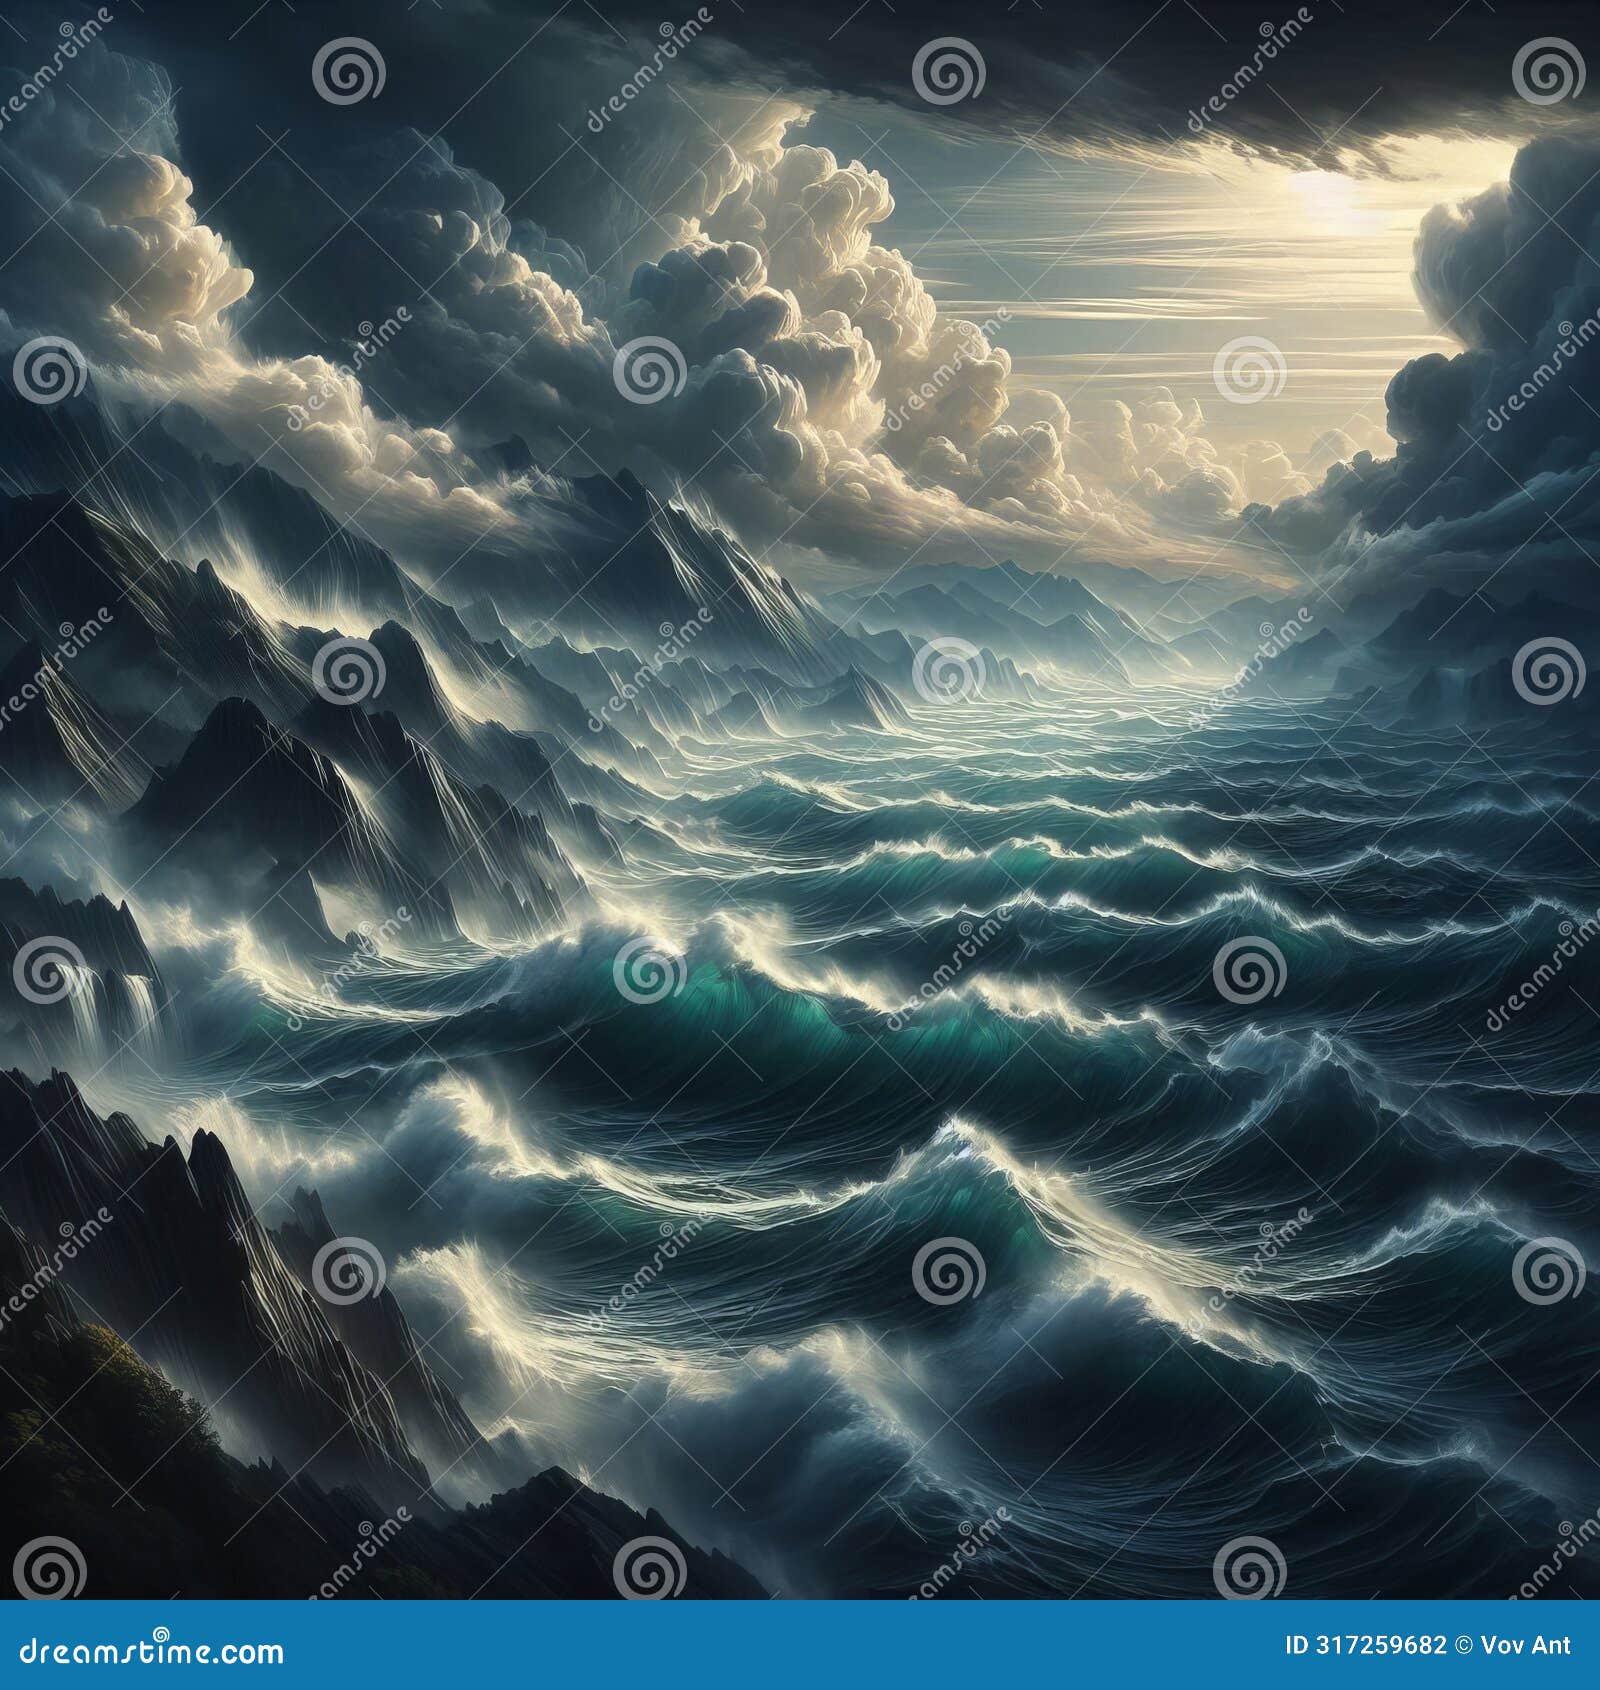 artistic interpretation of a stormy sea with powerful waves 